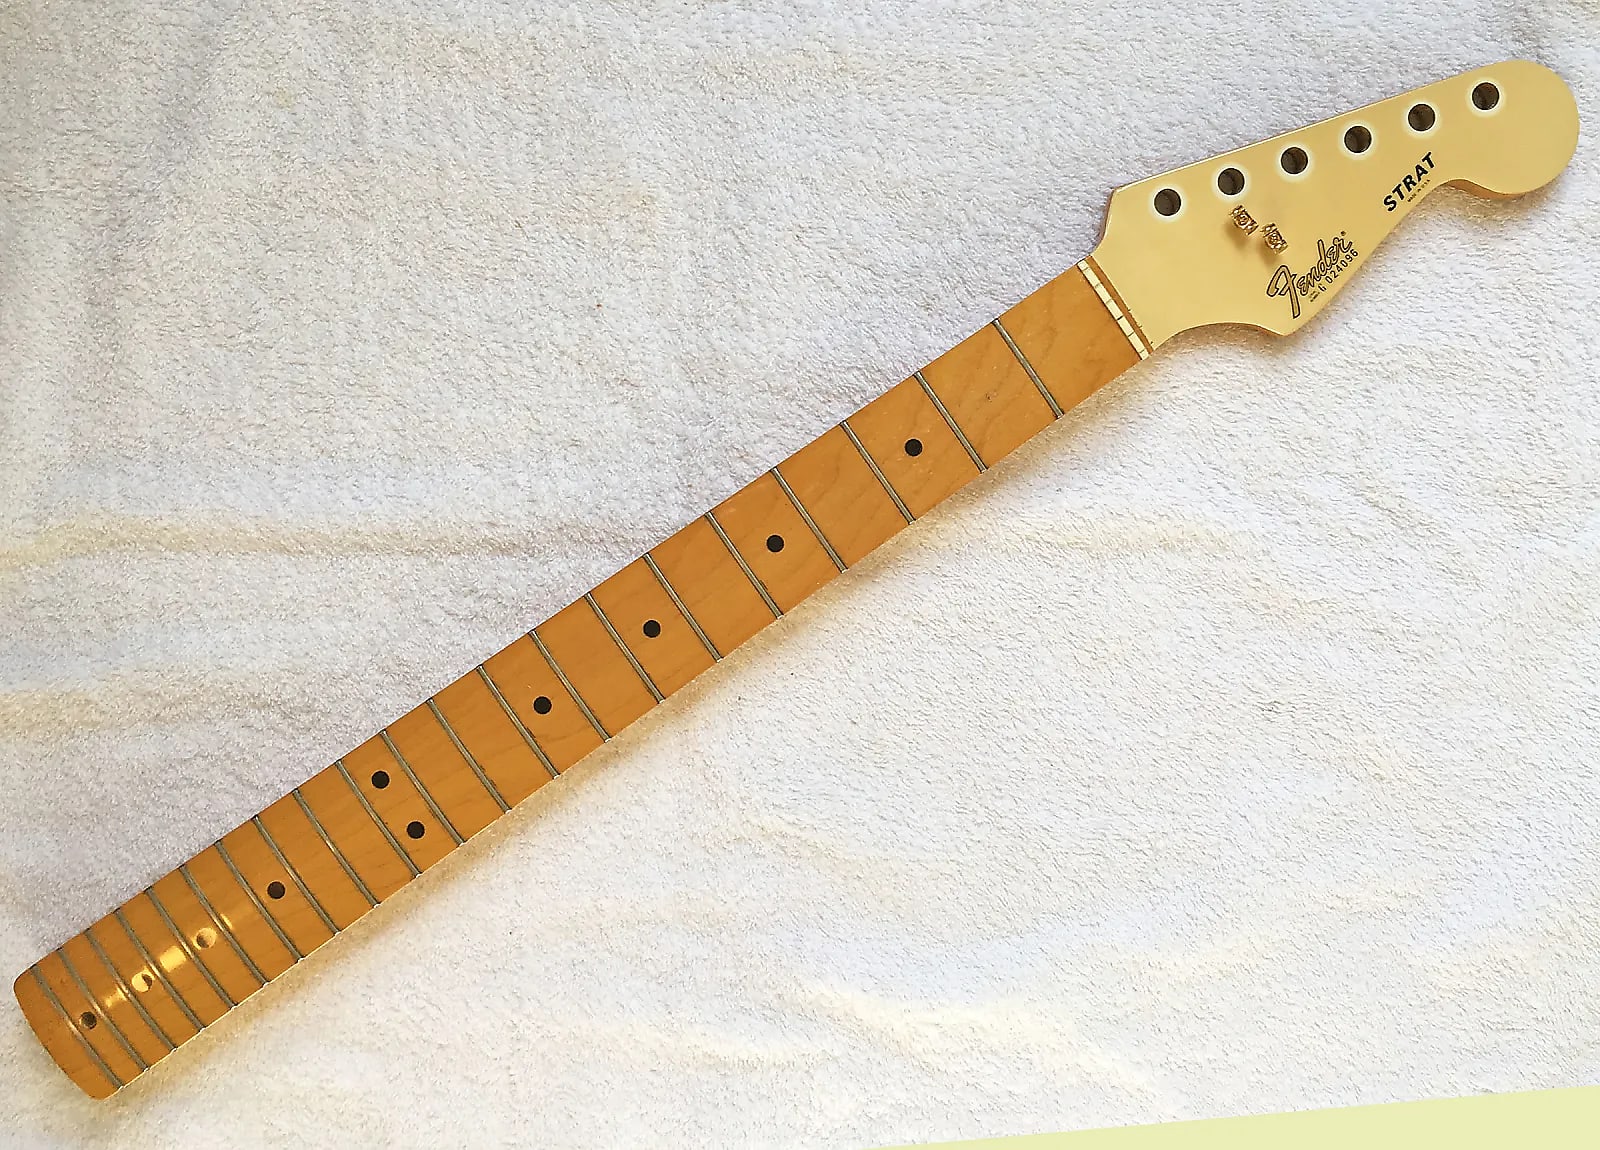 Used GUITAR NECK 80S MYSTERY COOL Accessories - Guitars